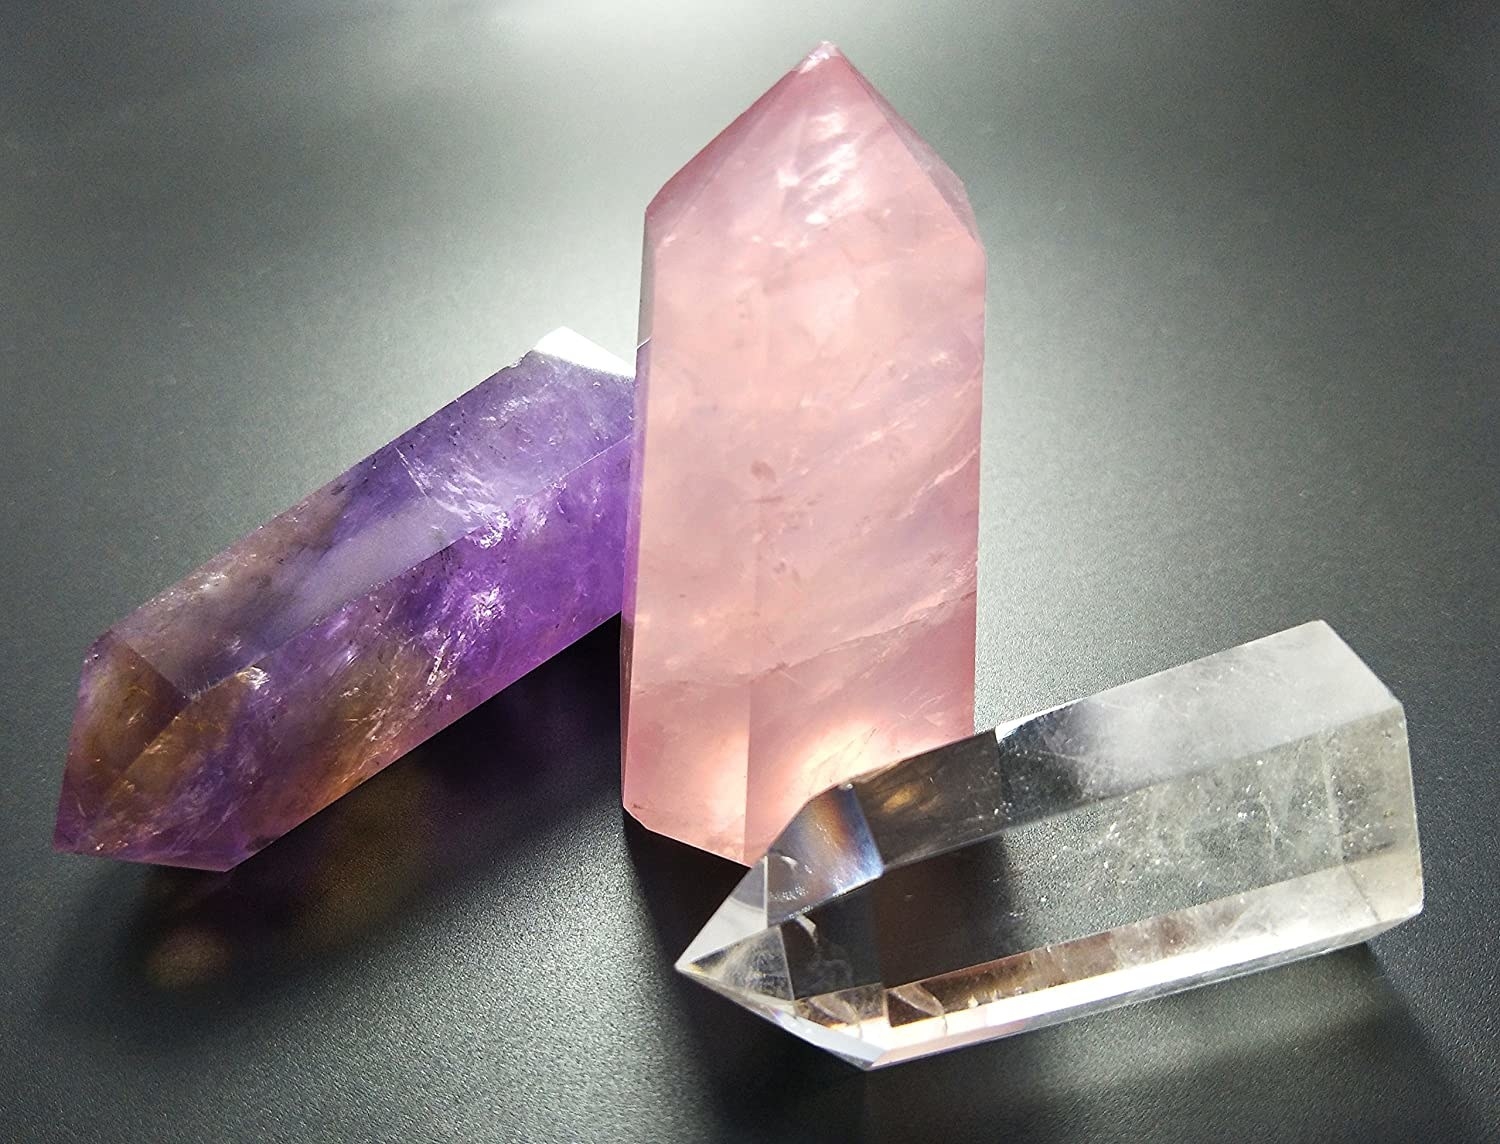 Two crystal points are flat on a table and one is upright